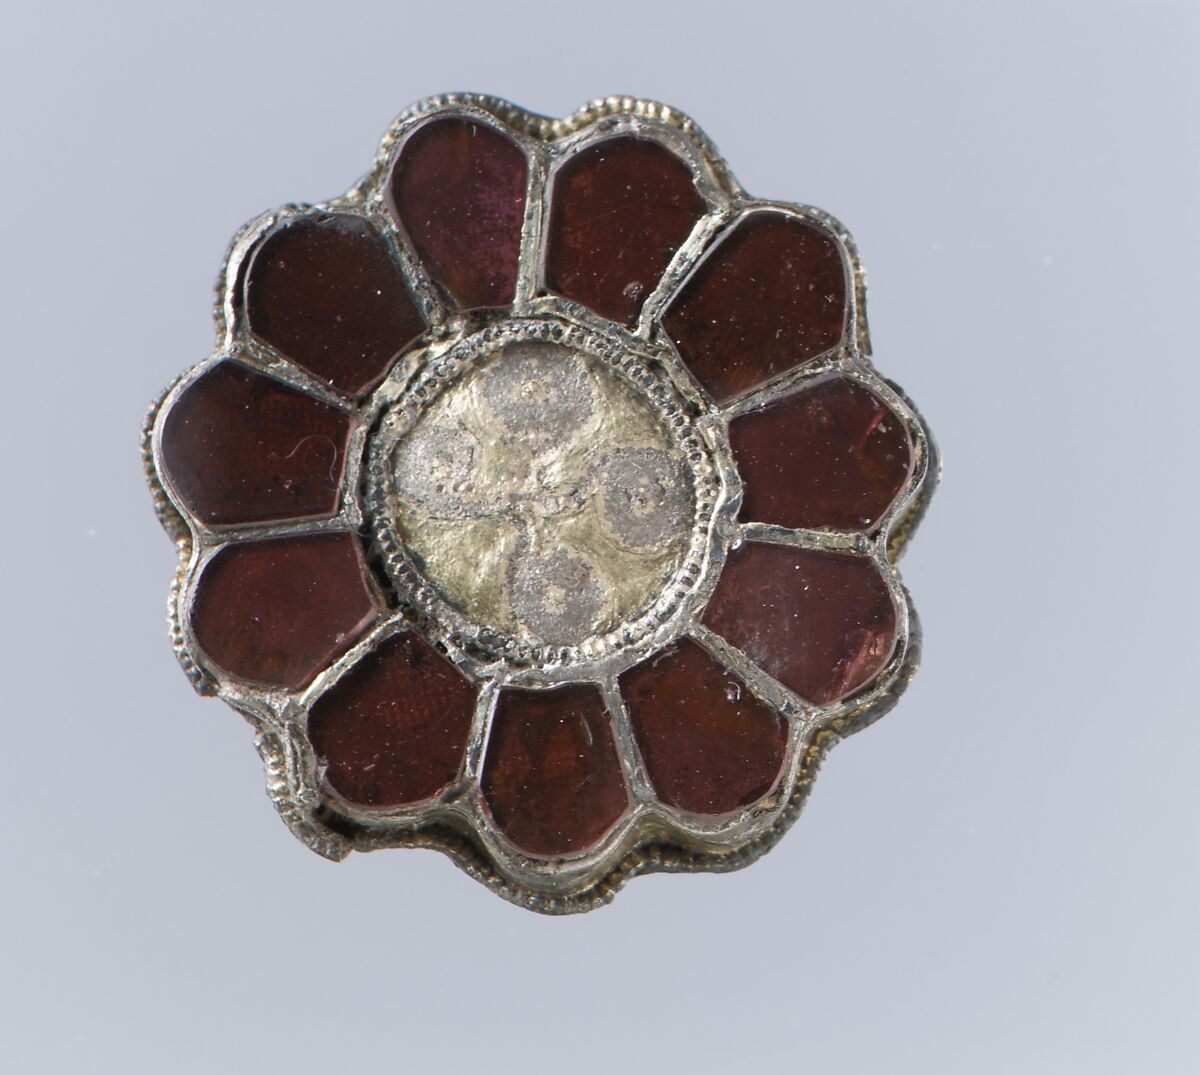 Rosette Brooch, Silver-gilt, garnets with patterned foil backings, Gilded silver with garnets, glass, and pearl, Frankish 